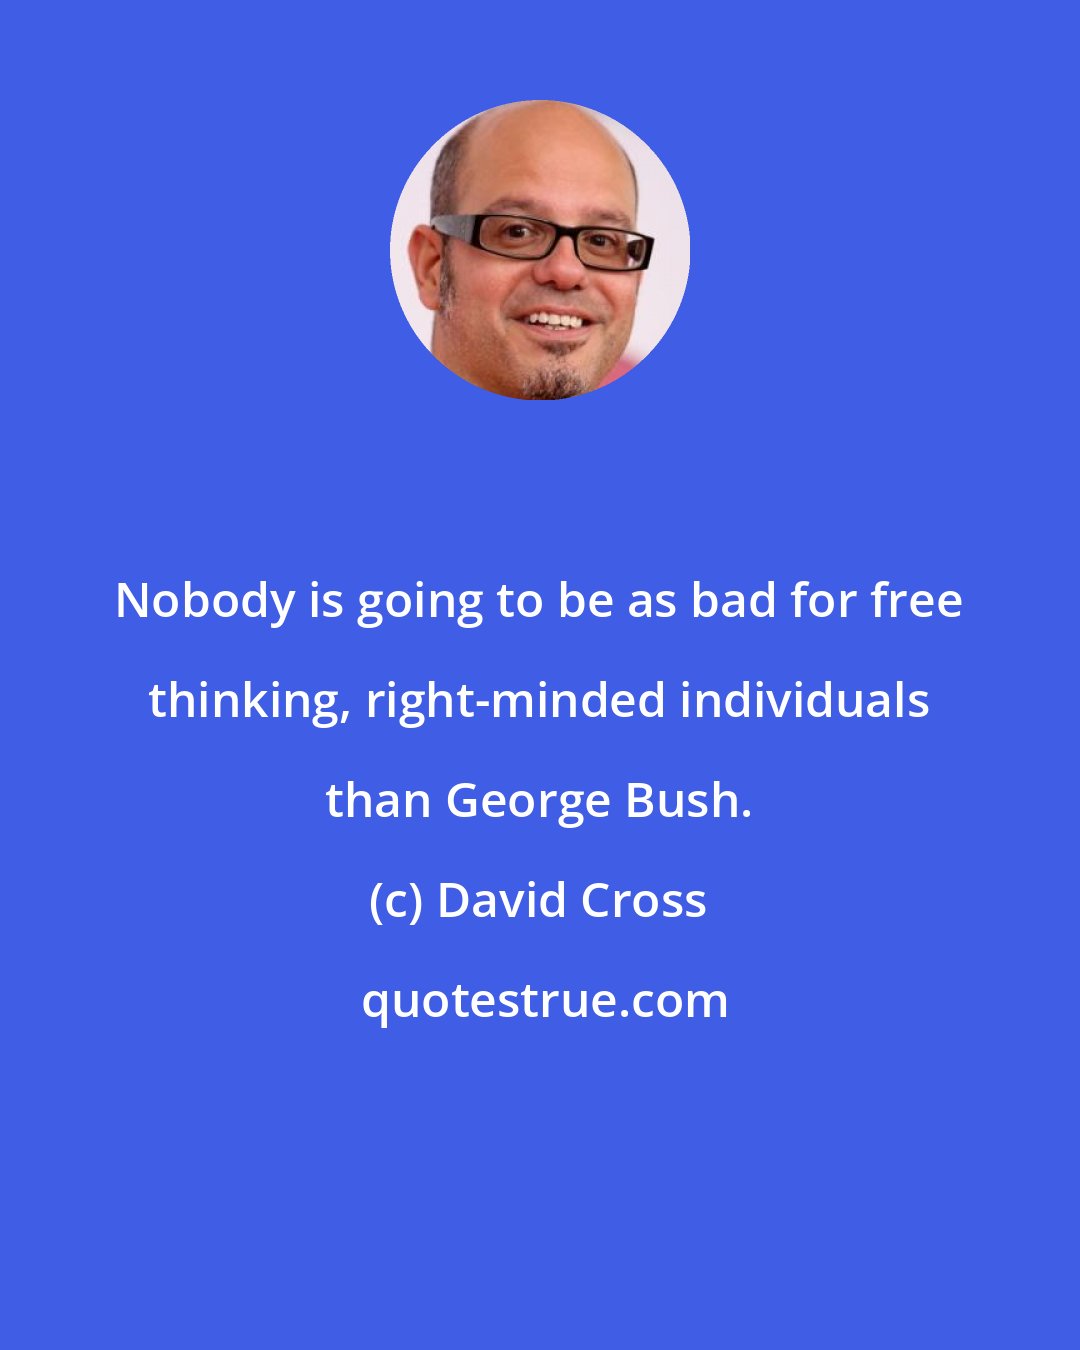 David Cross: Nobody is going to be as bad for free thinking, right-minded individuals than George Bush.